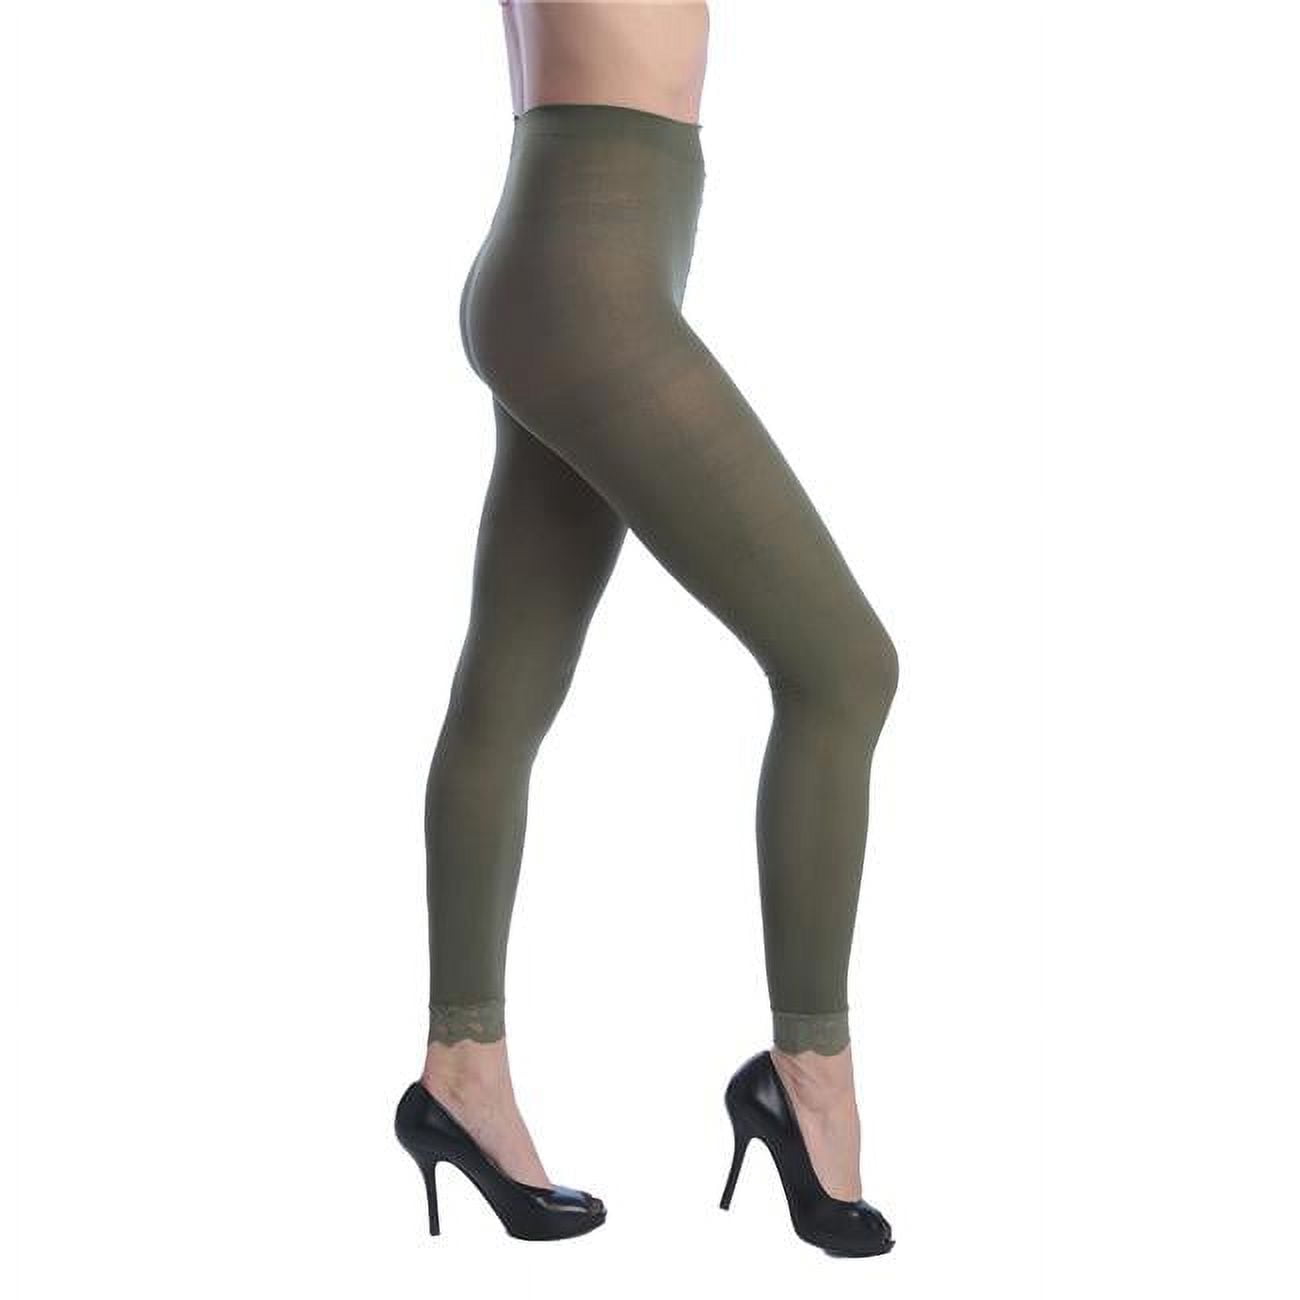 Women's Super Opaque Control Top Footless Tights #Ad #Opaque